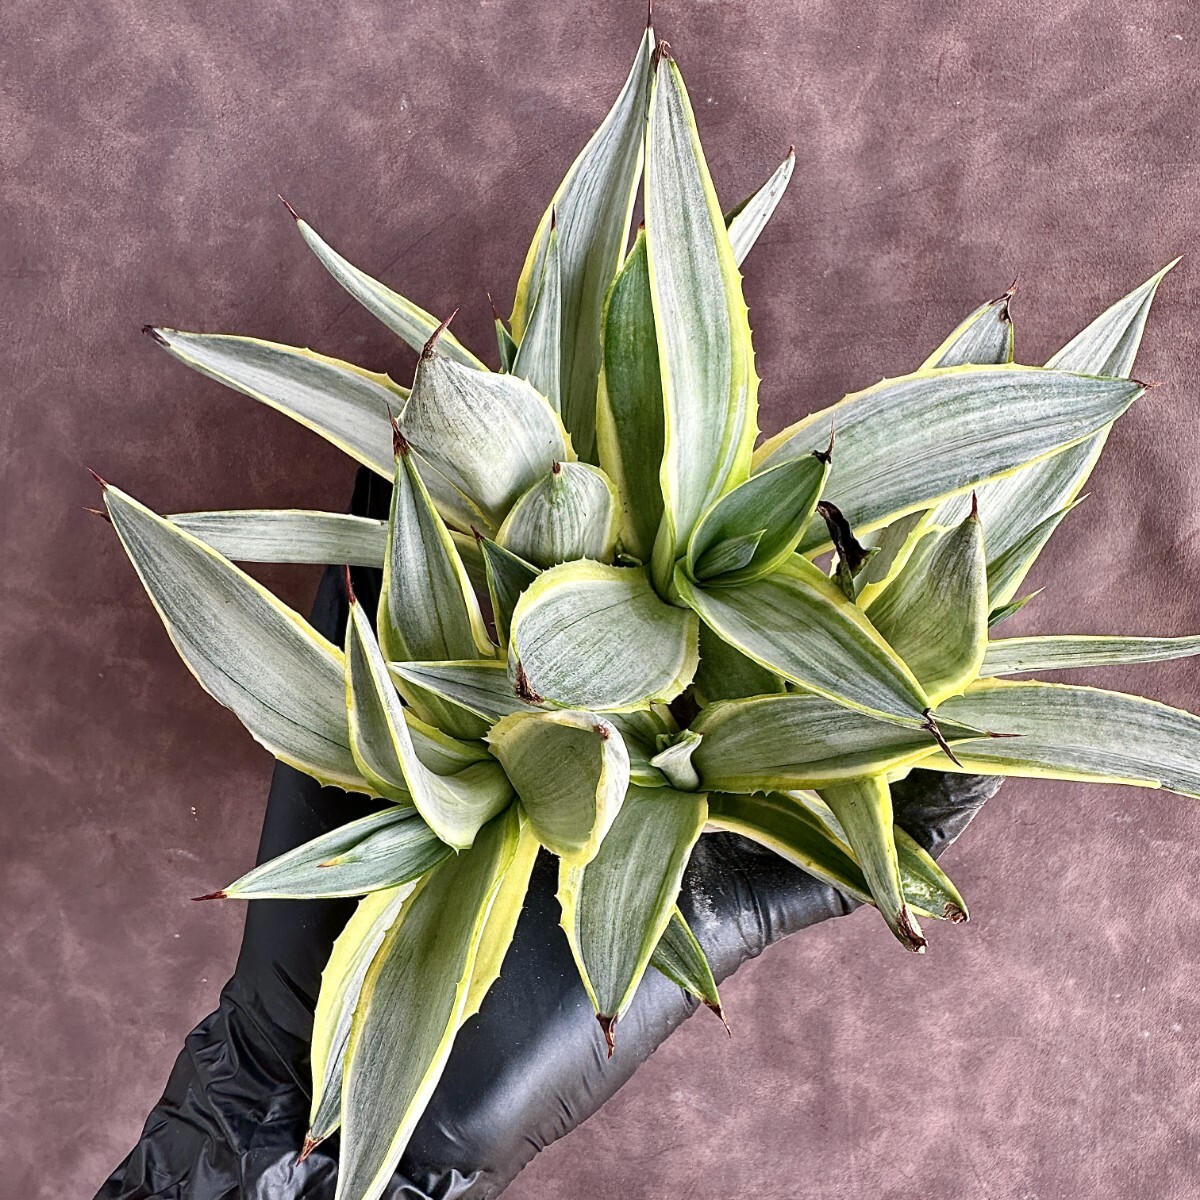 [Lj_plants]W20 succulent plant agave Milky Way . person clear . finest quality .. wheel .S Class is rare stock ultimate beautiful finest quality . stock 5 stock including in a package 